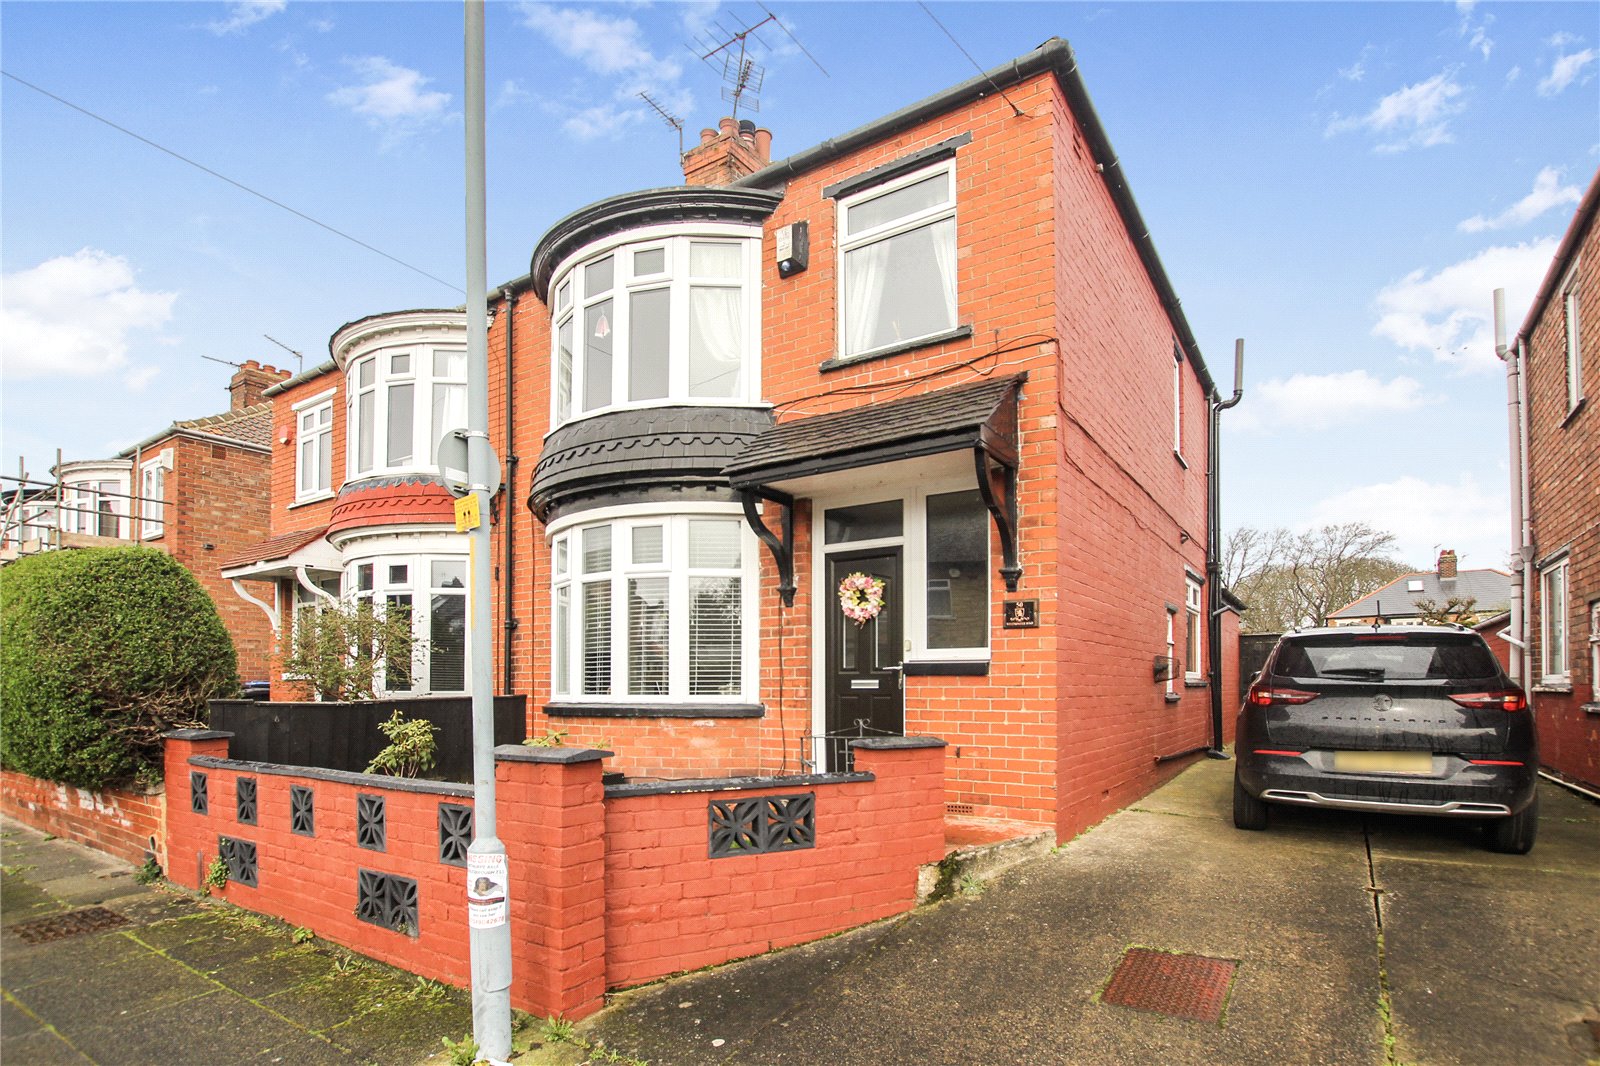 3 bed house for sale in Westminster Road, Linthorpe 1